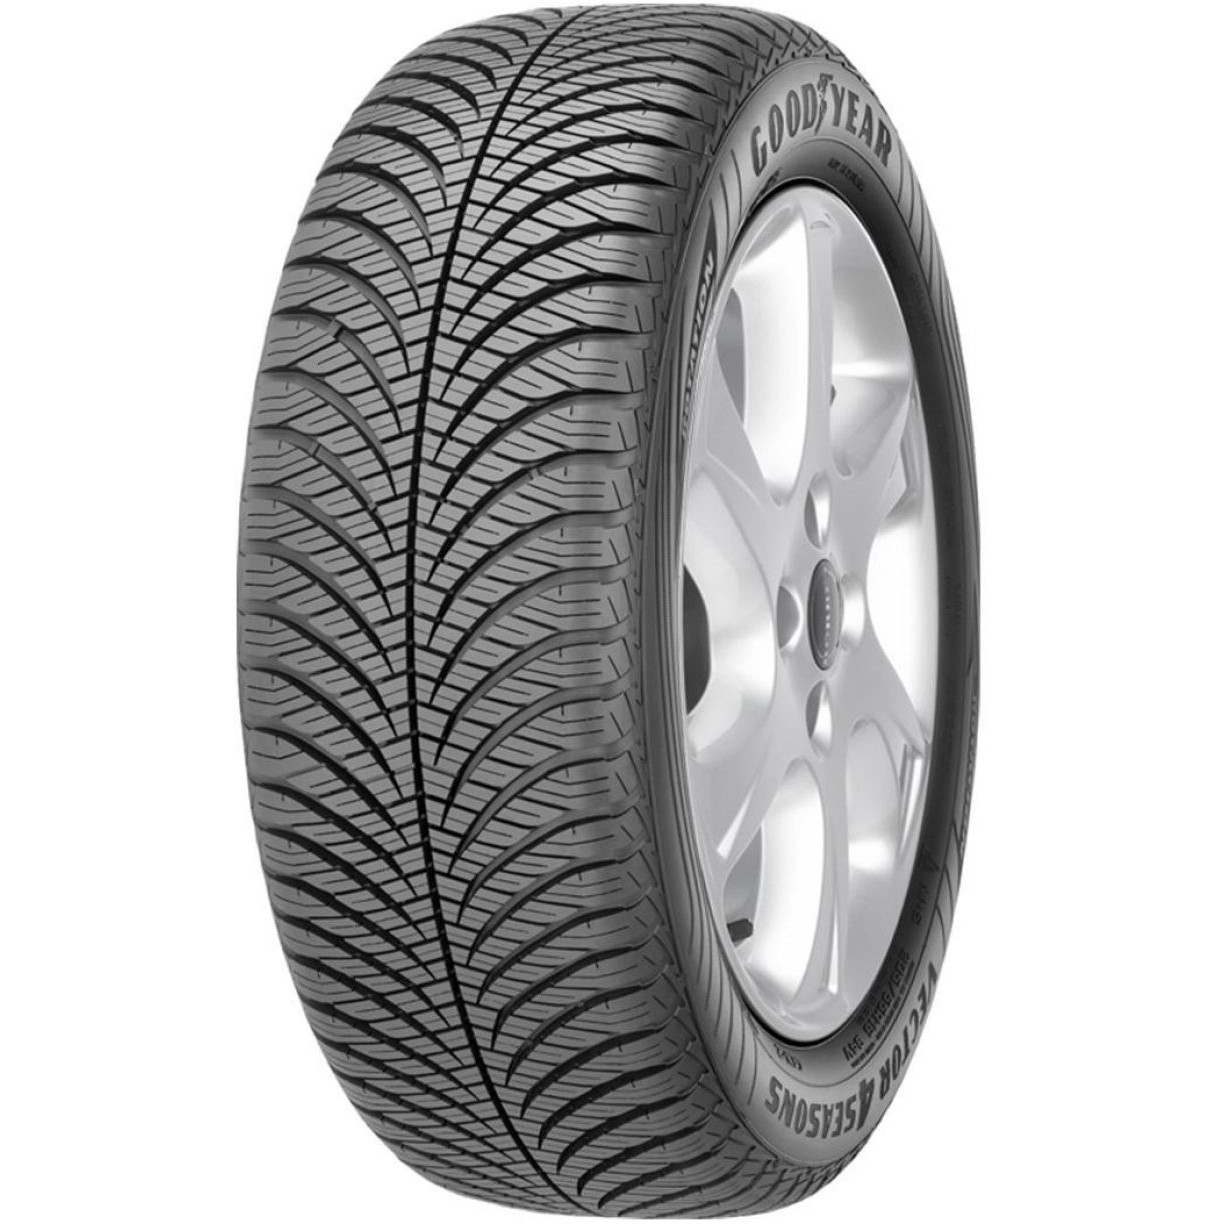 4Seasons Vector - Tire Tests Goodyear Reviews and